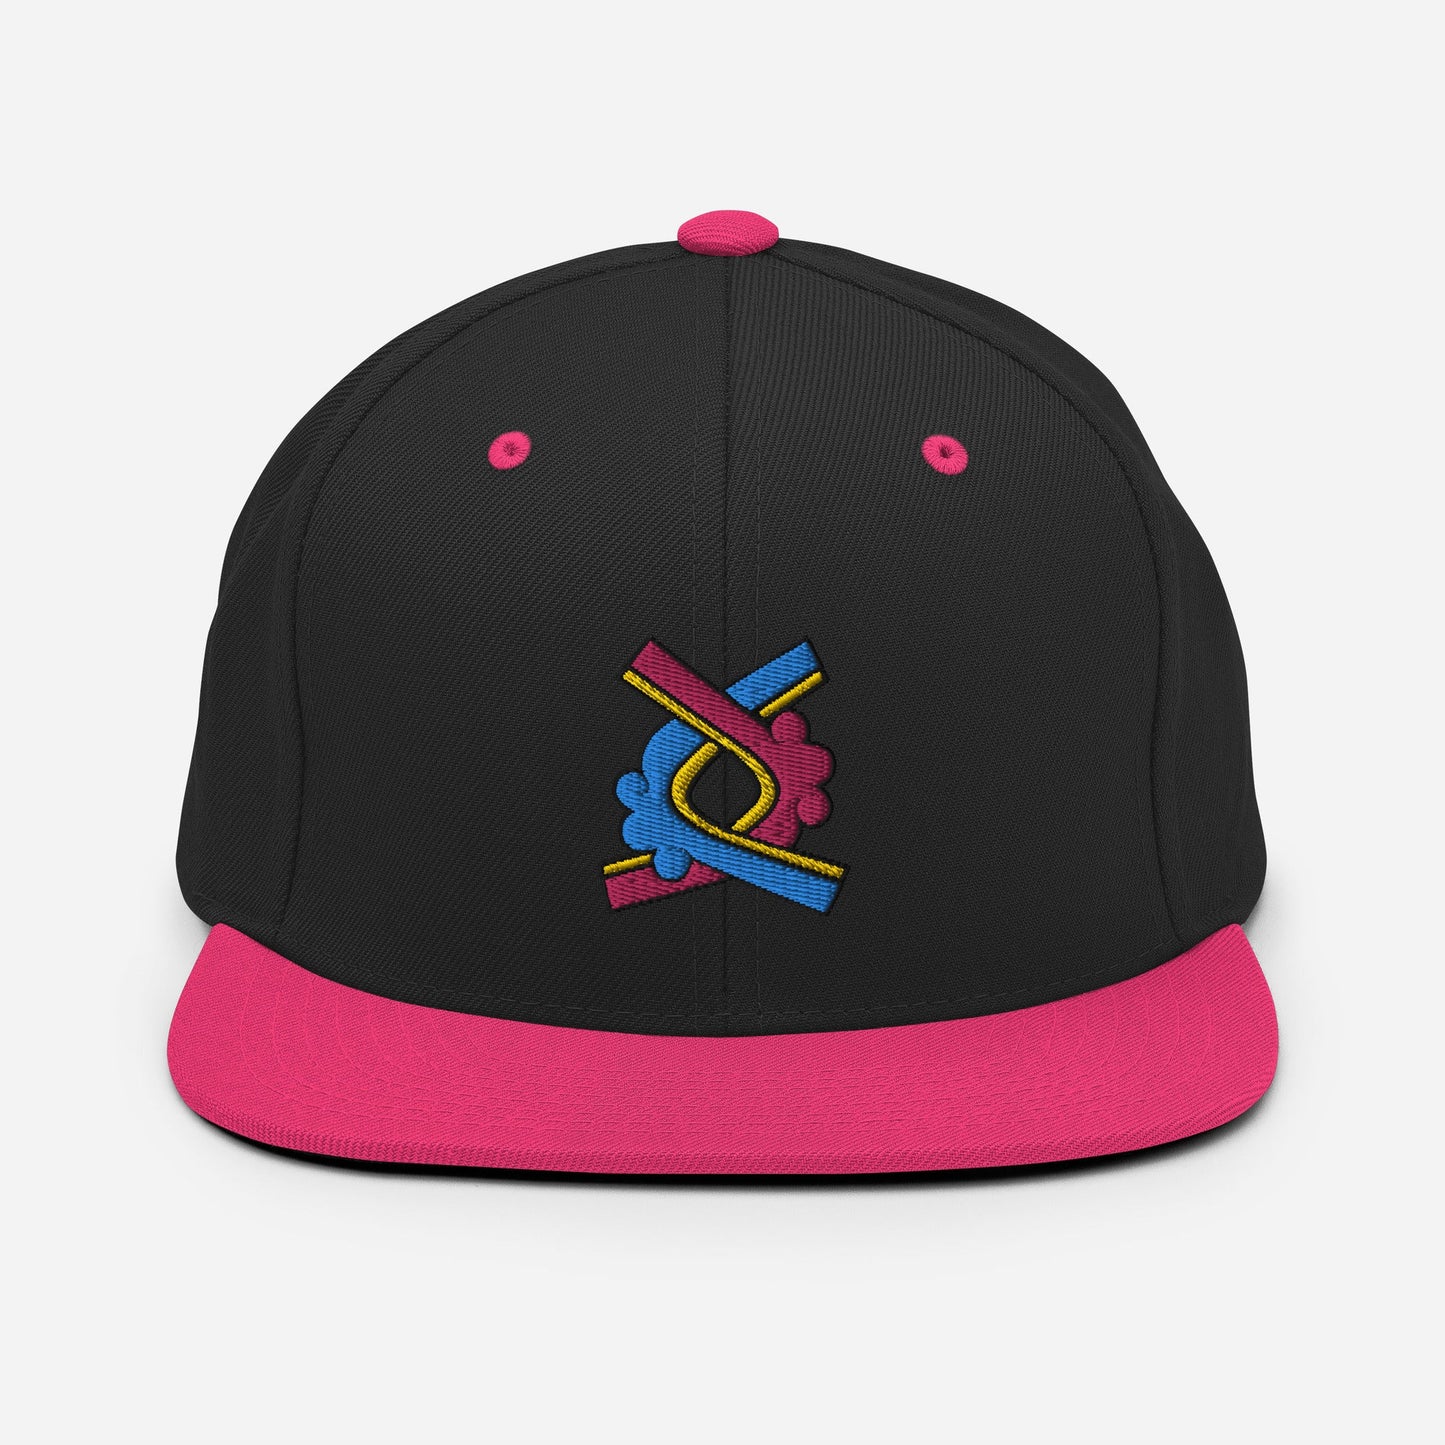 Ollin (Bright Colorway) - Embroidered Snapback Hat